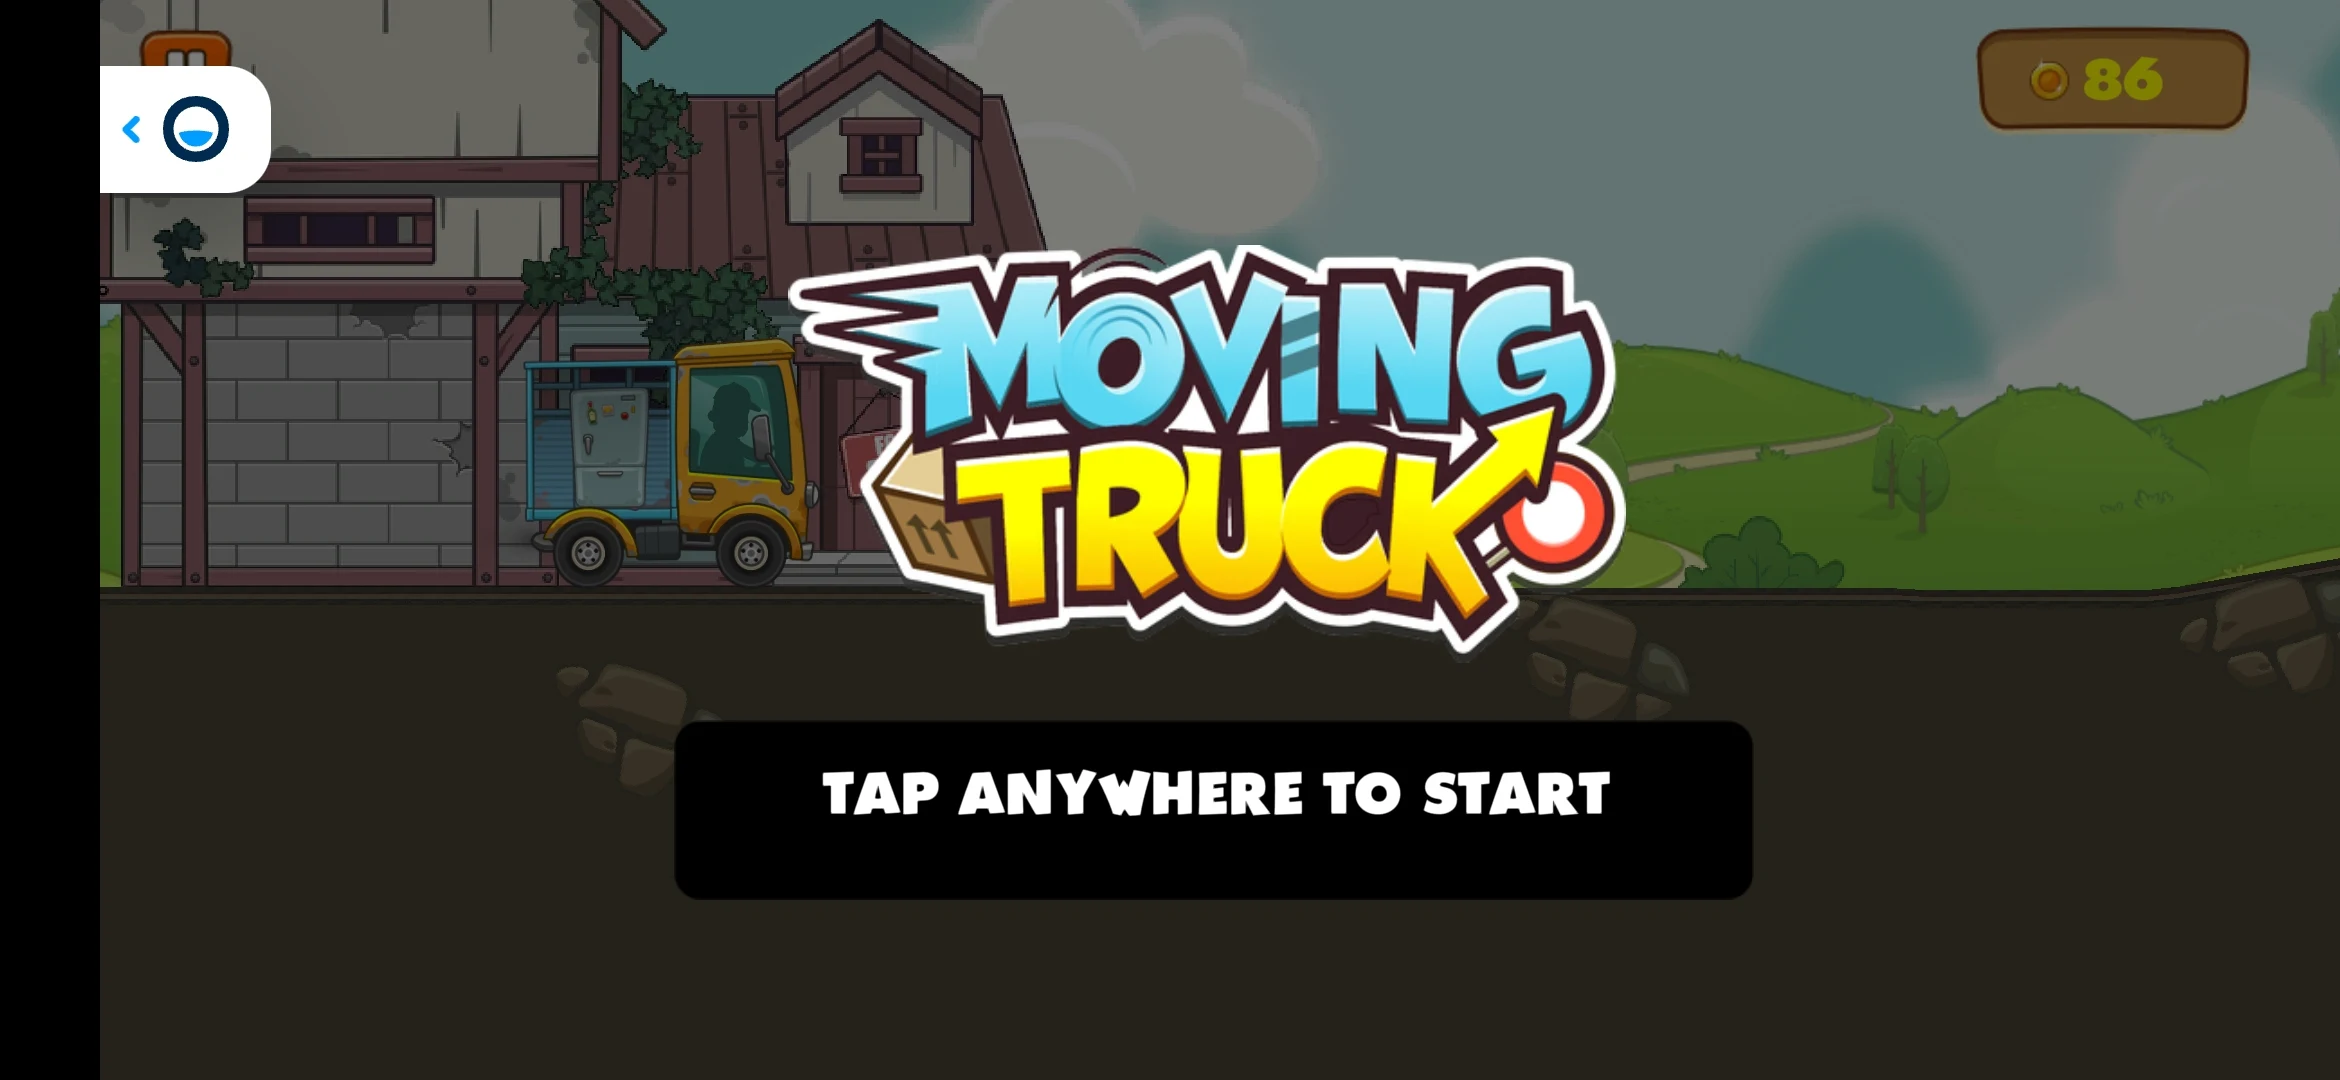 Truck Moving